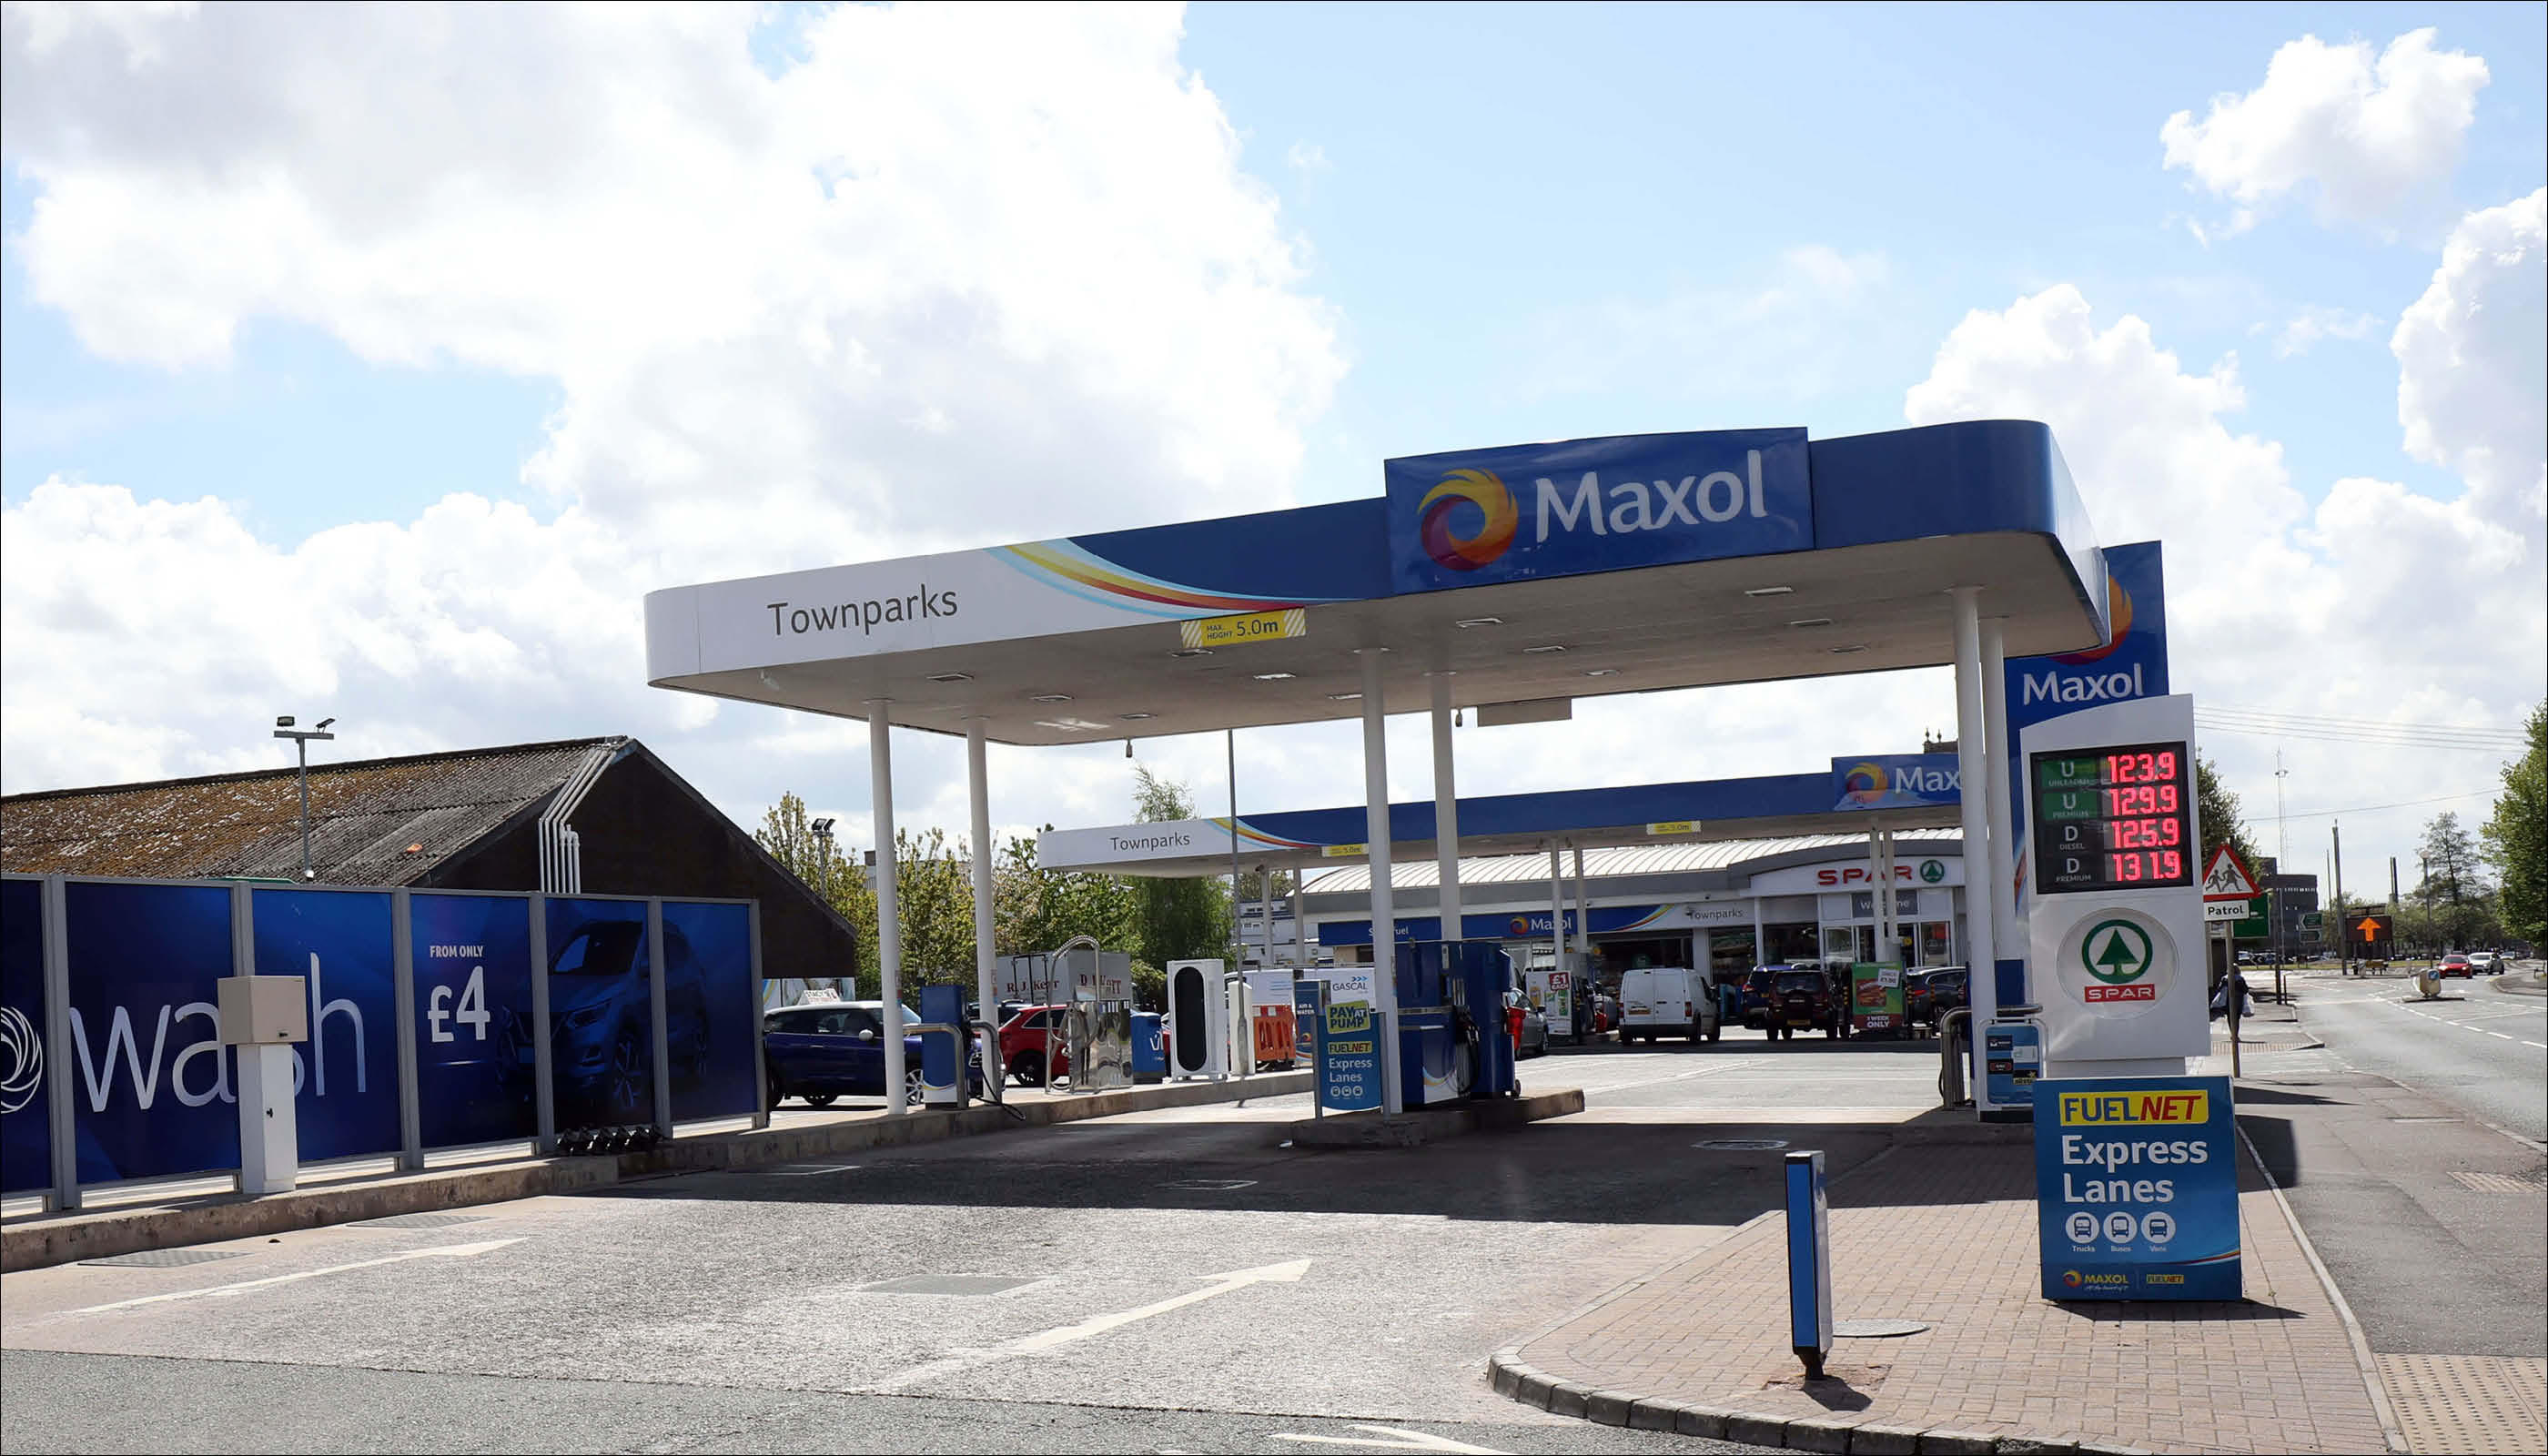 Images Maxol Service Station Townparks